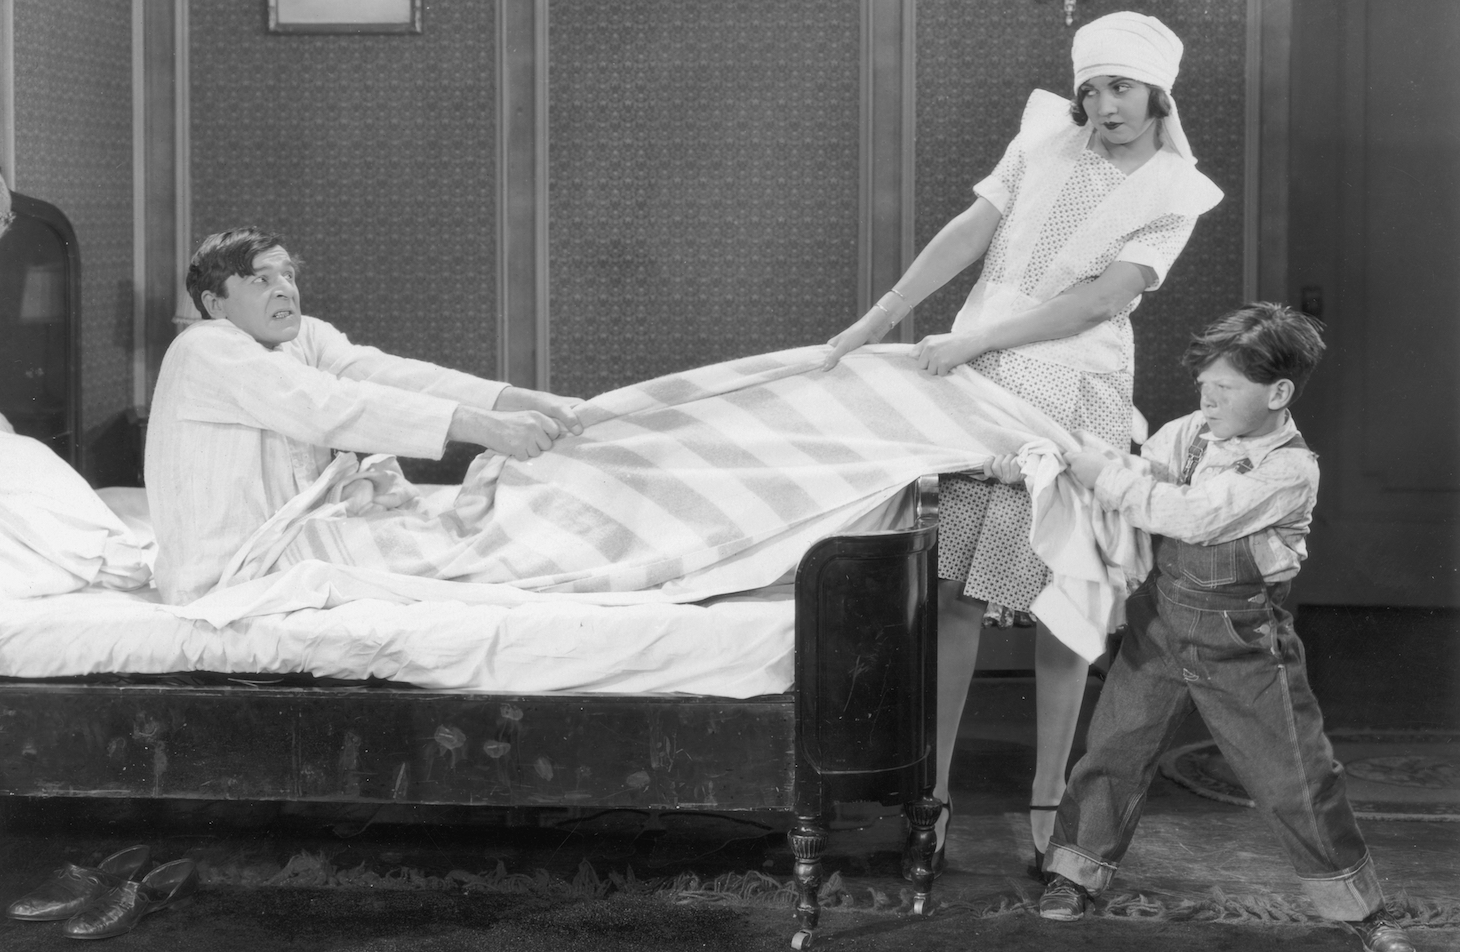 Actors Lucille Hutton and Jackie Levine play tug-of-war with Jack Miller's blanket while attempting to get him out of bed in a still from the silent film comedy 'Oh, Mama'. (Photo by Hulton Archive/Getty Images)